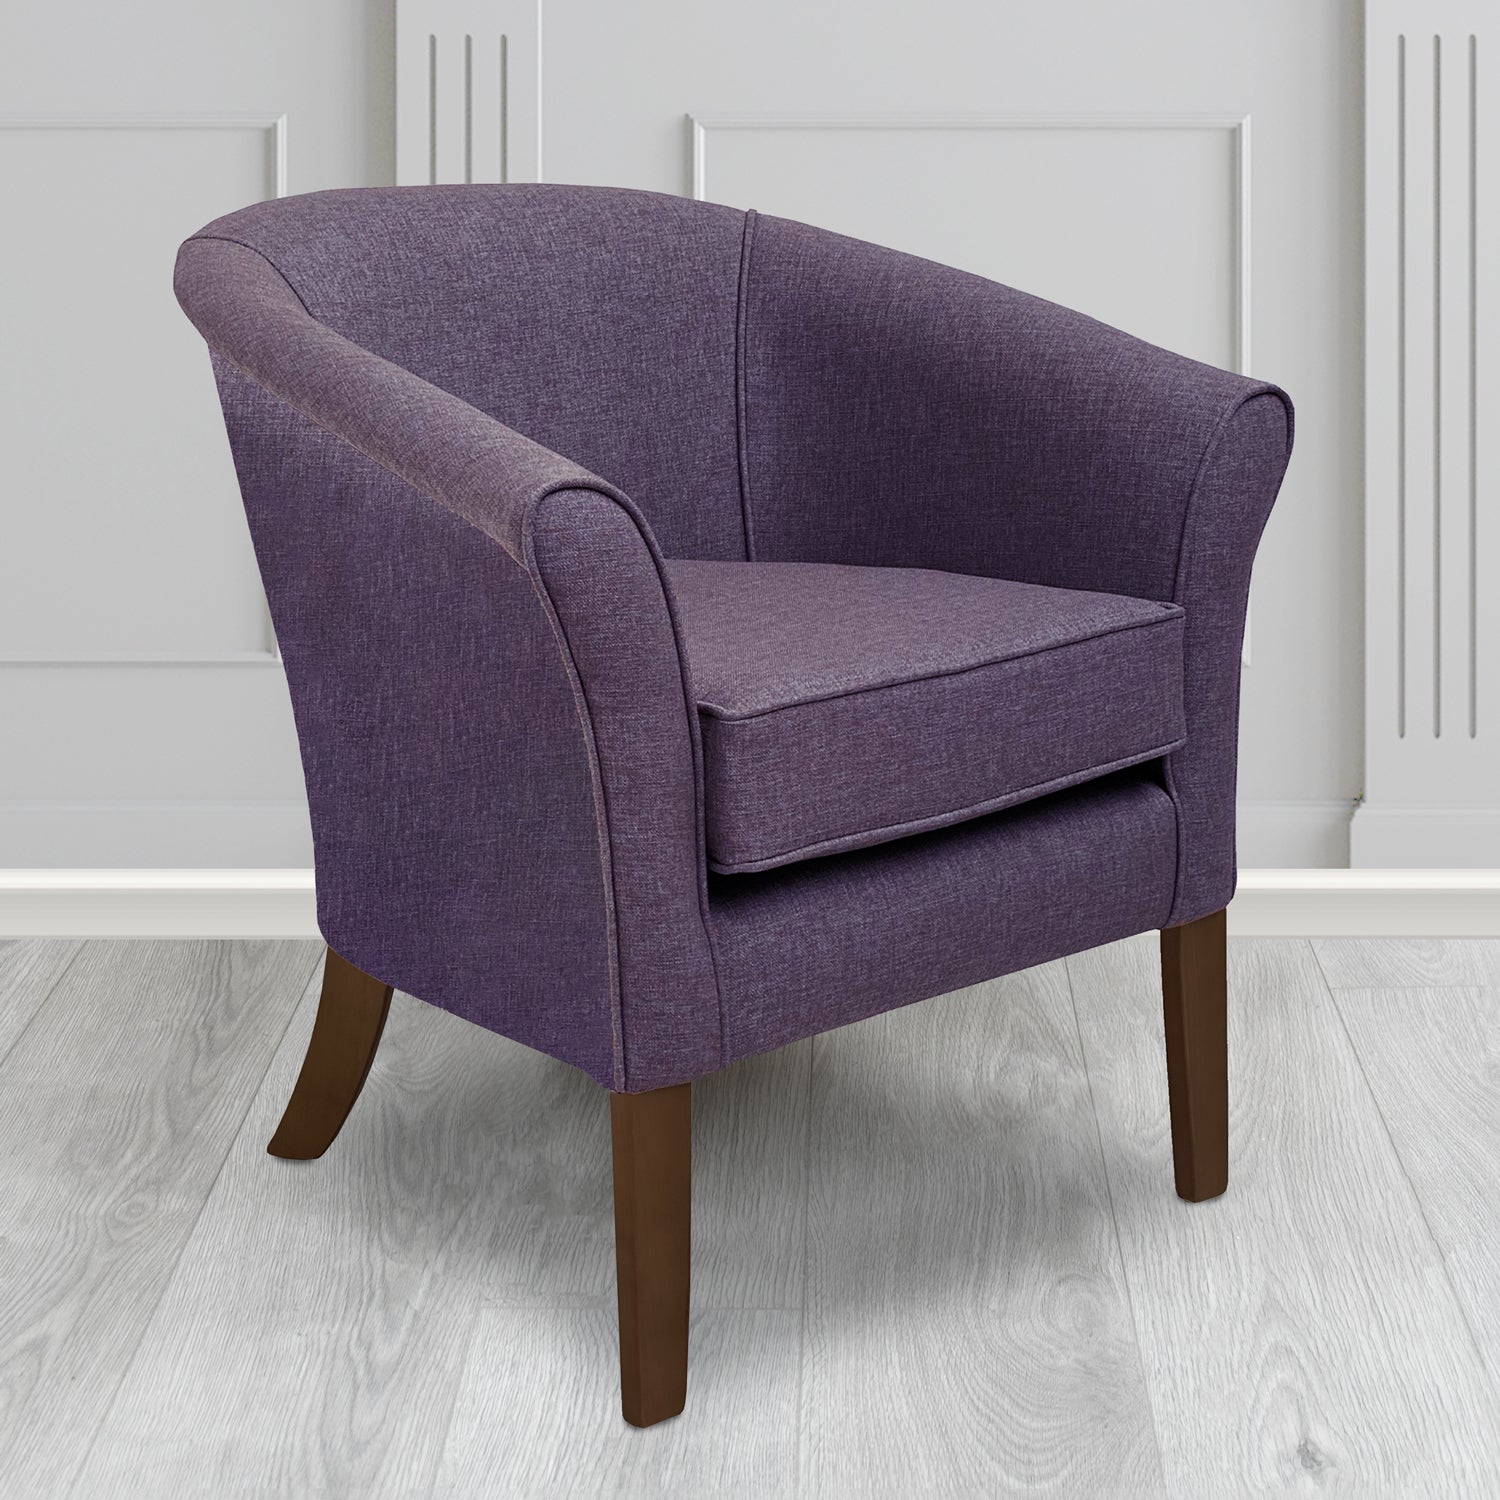 Aspen Tub Chair in Marna 202 Amethyst Crib 5 Fabric - Antimicrobial, Stain Resistant & Waterproof - The Tub Chair Shop